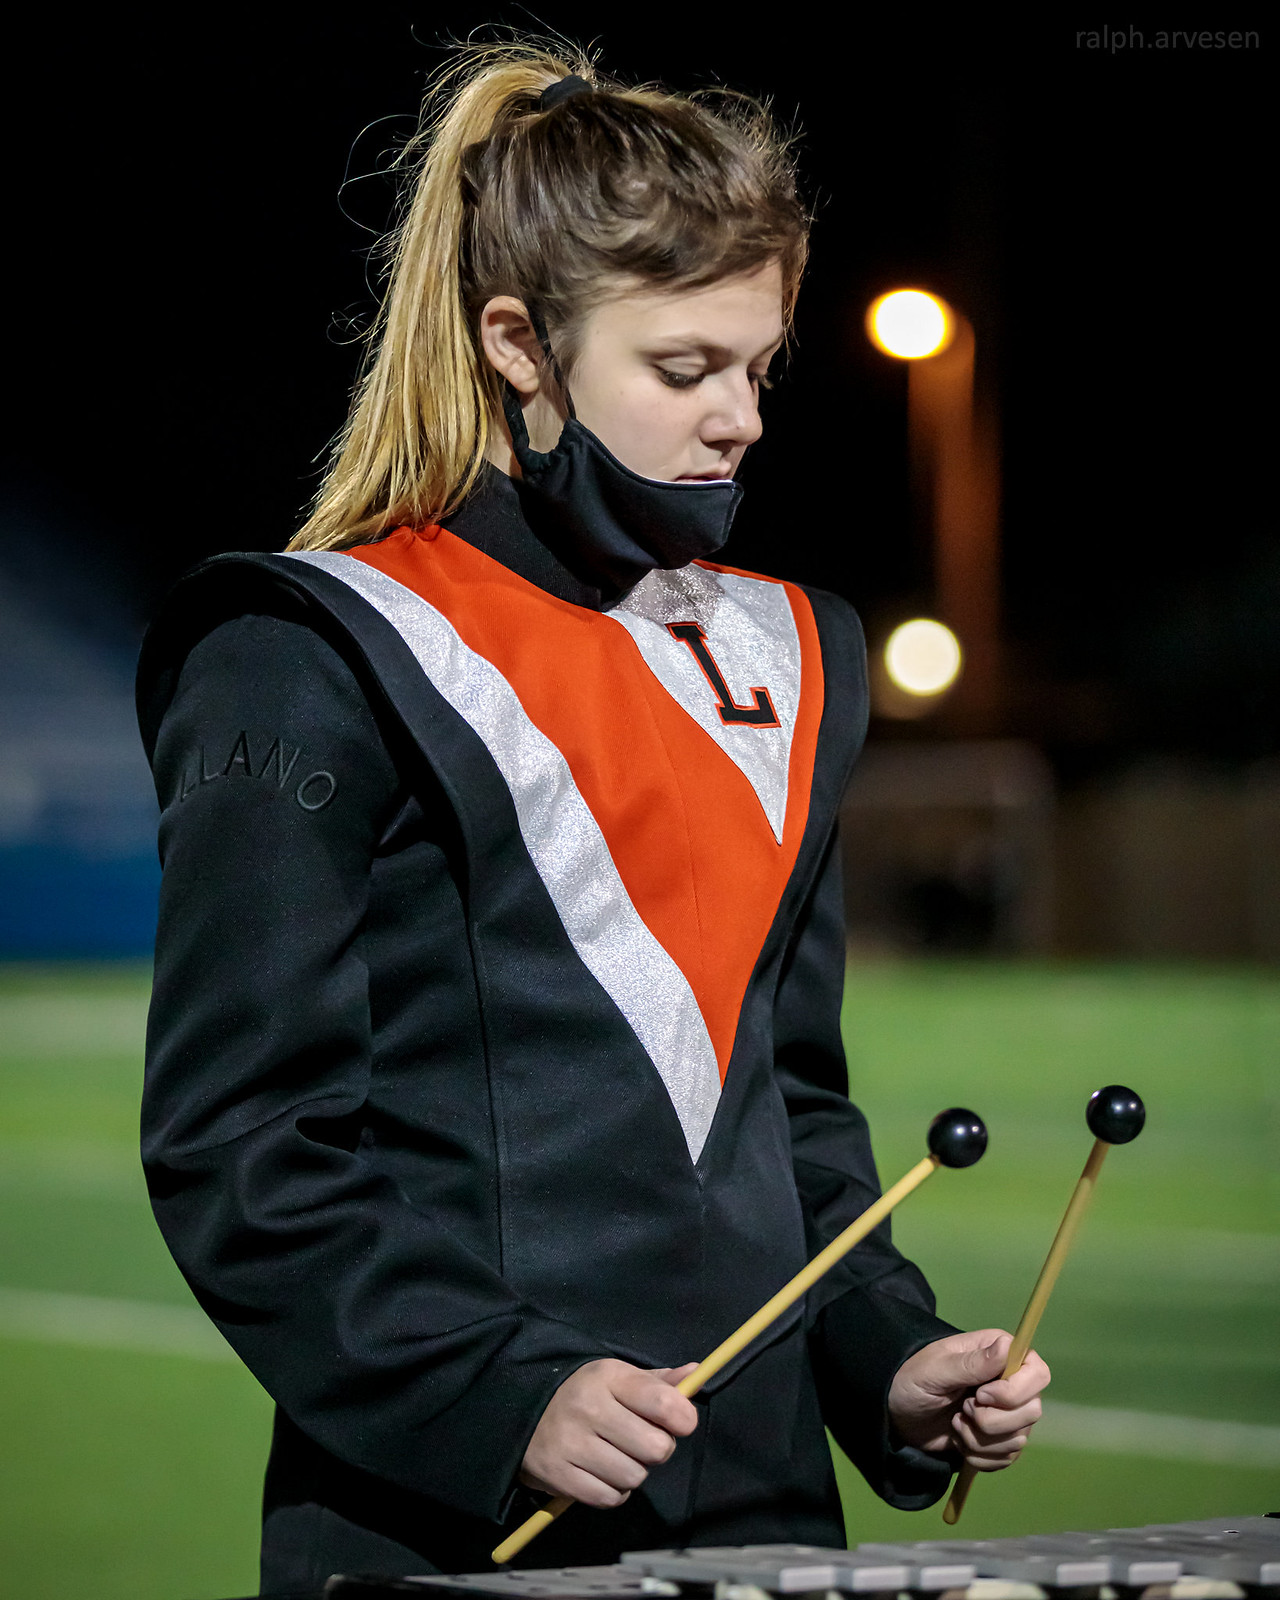 Llano Marching Band | Texas Review | Ralph Arvesen